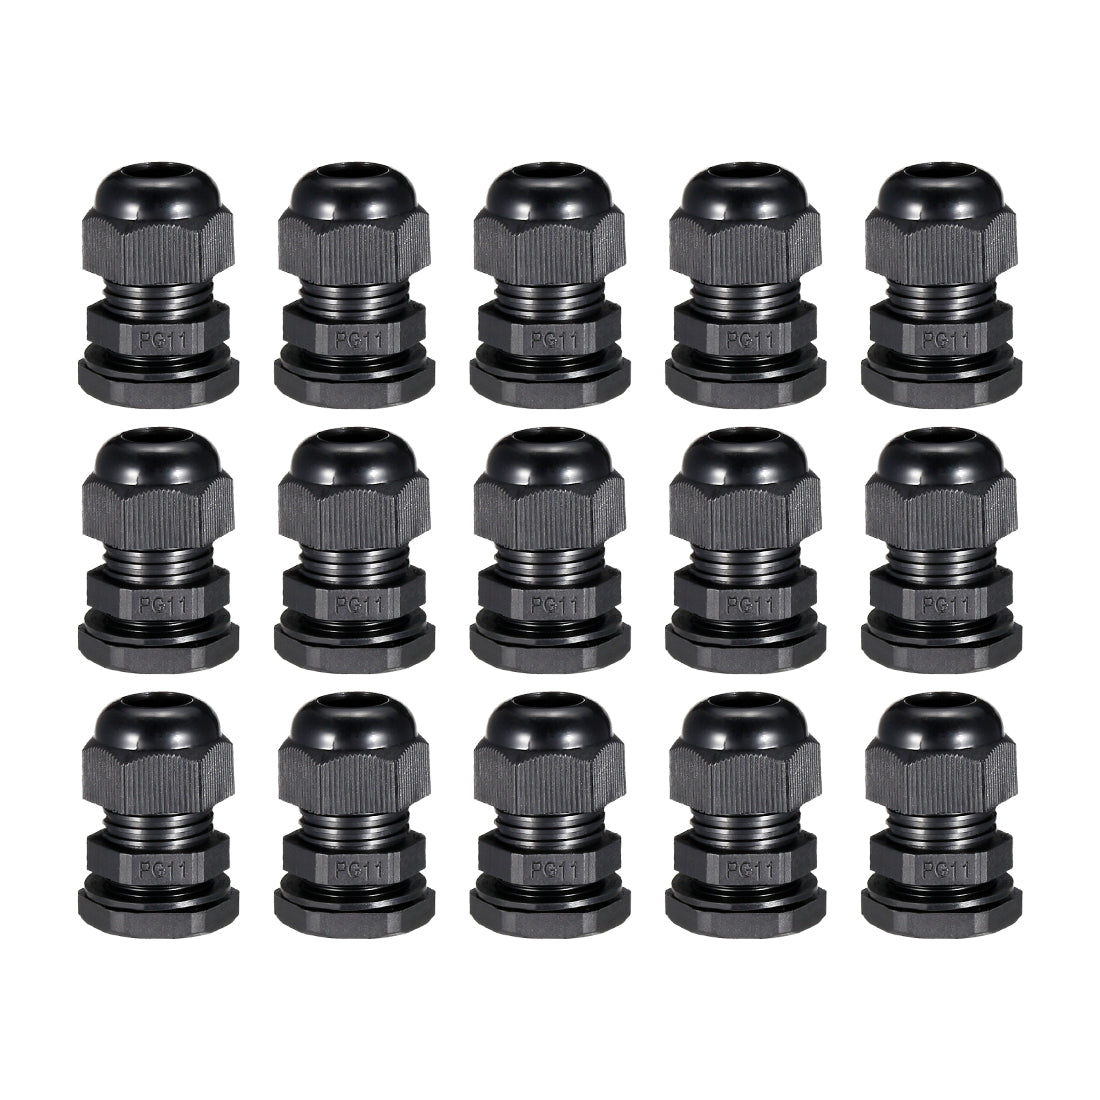 uxcell Uxcell 15Pcs PG11 Cable Gland Waterproof Plastic Joint Adjustable Locknut Black for 5mm-10mm Dia Cable Wire